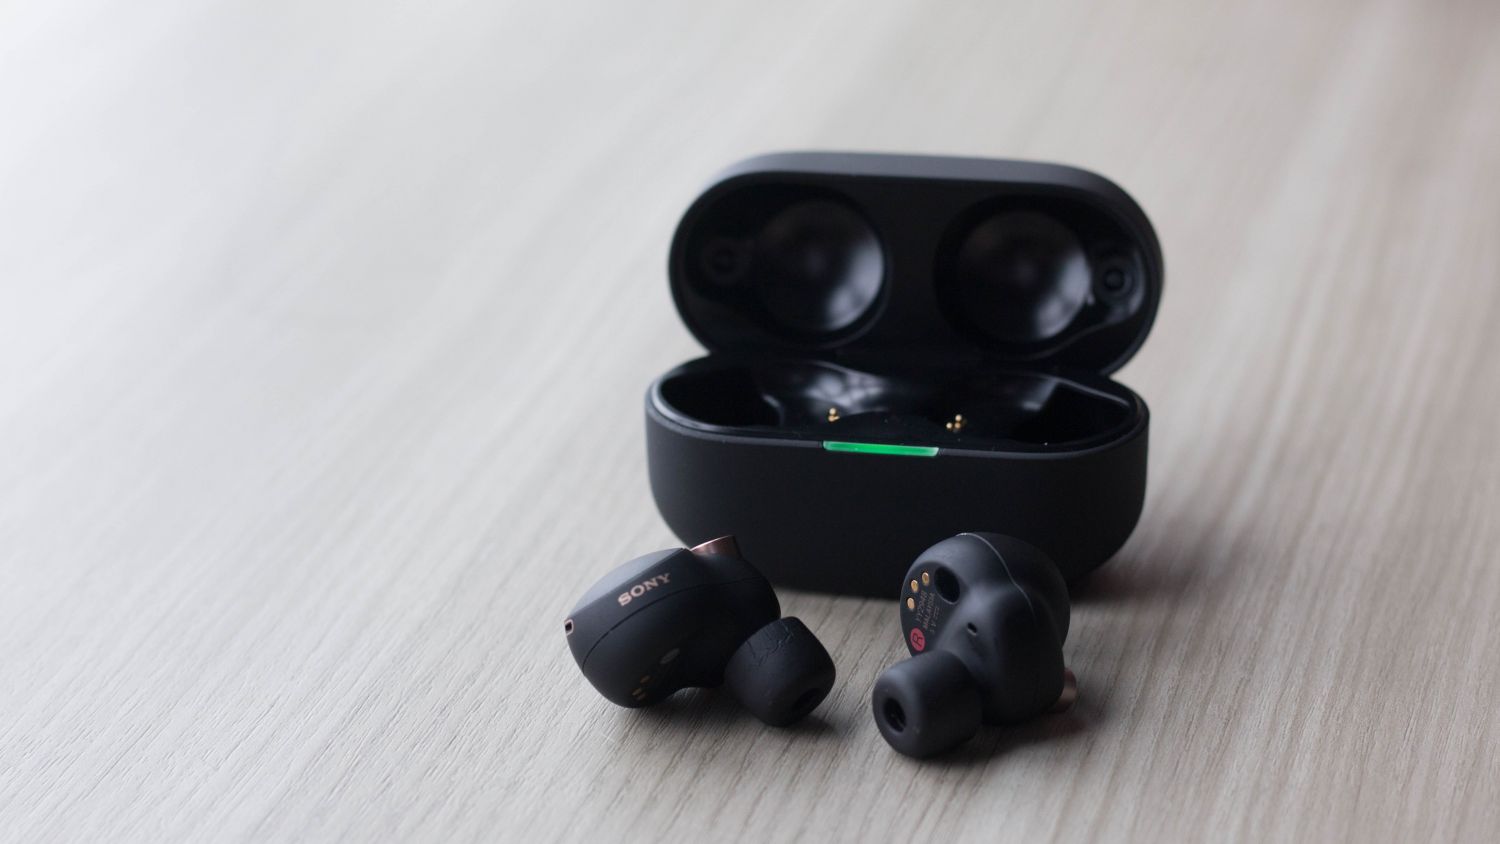 Sony sets a new standard with the WF-1000XM4 earbuds